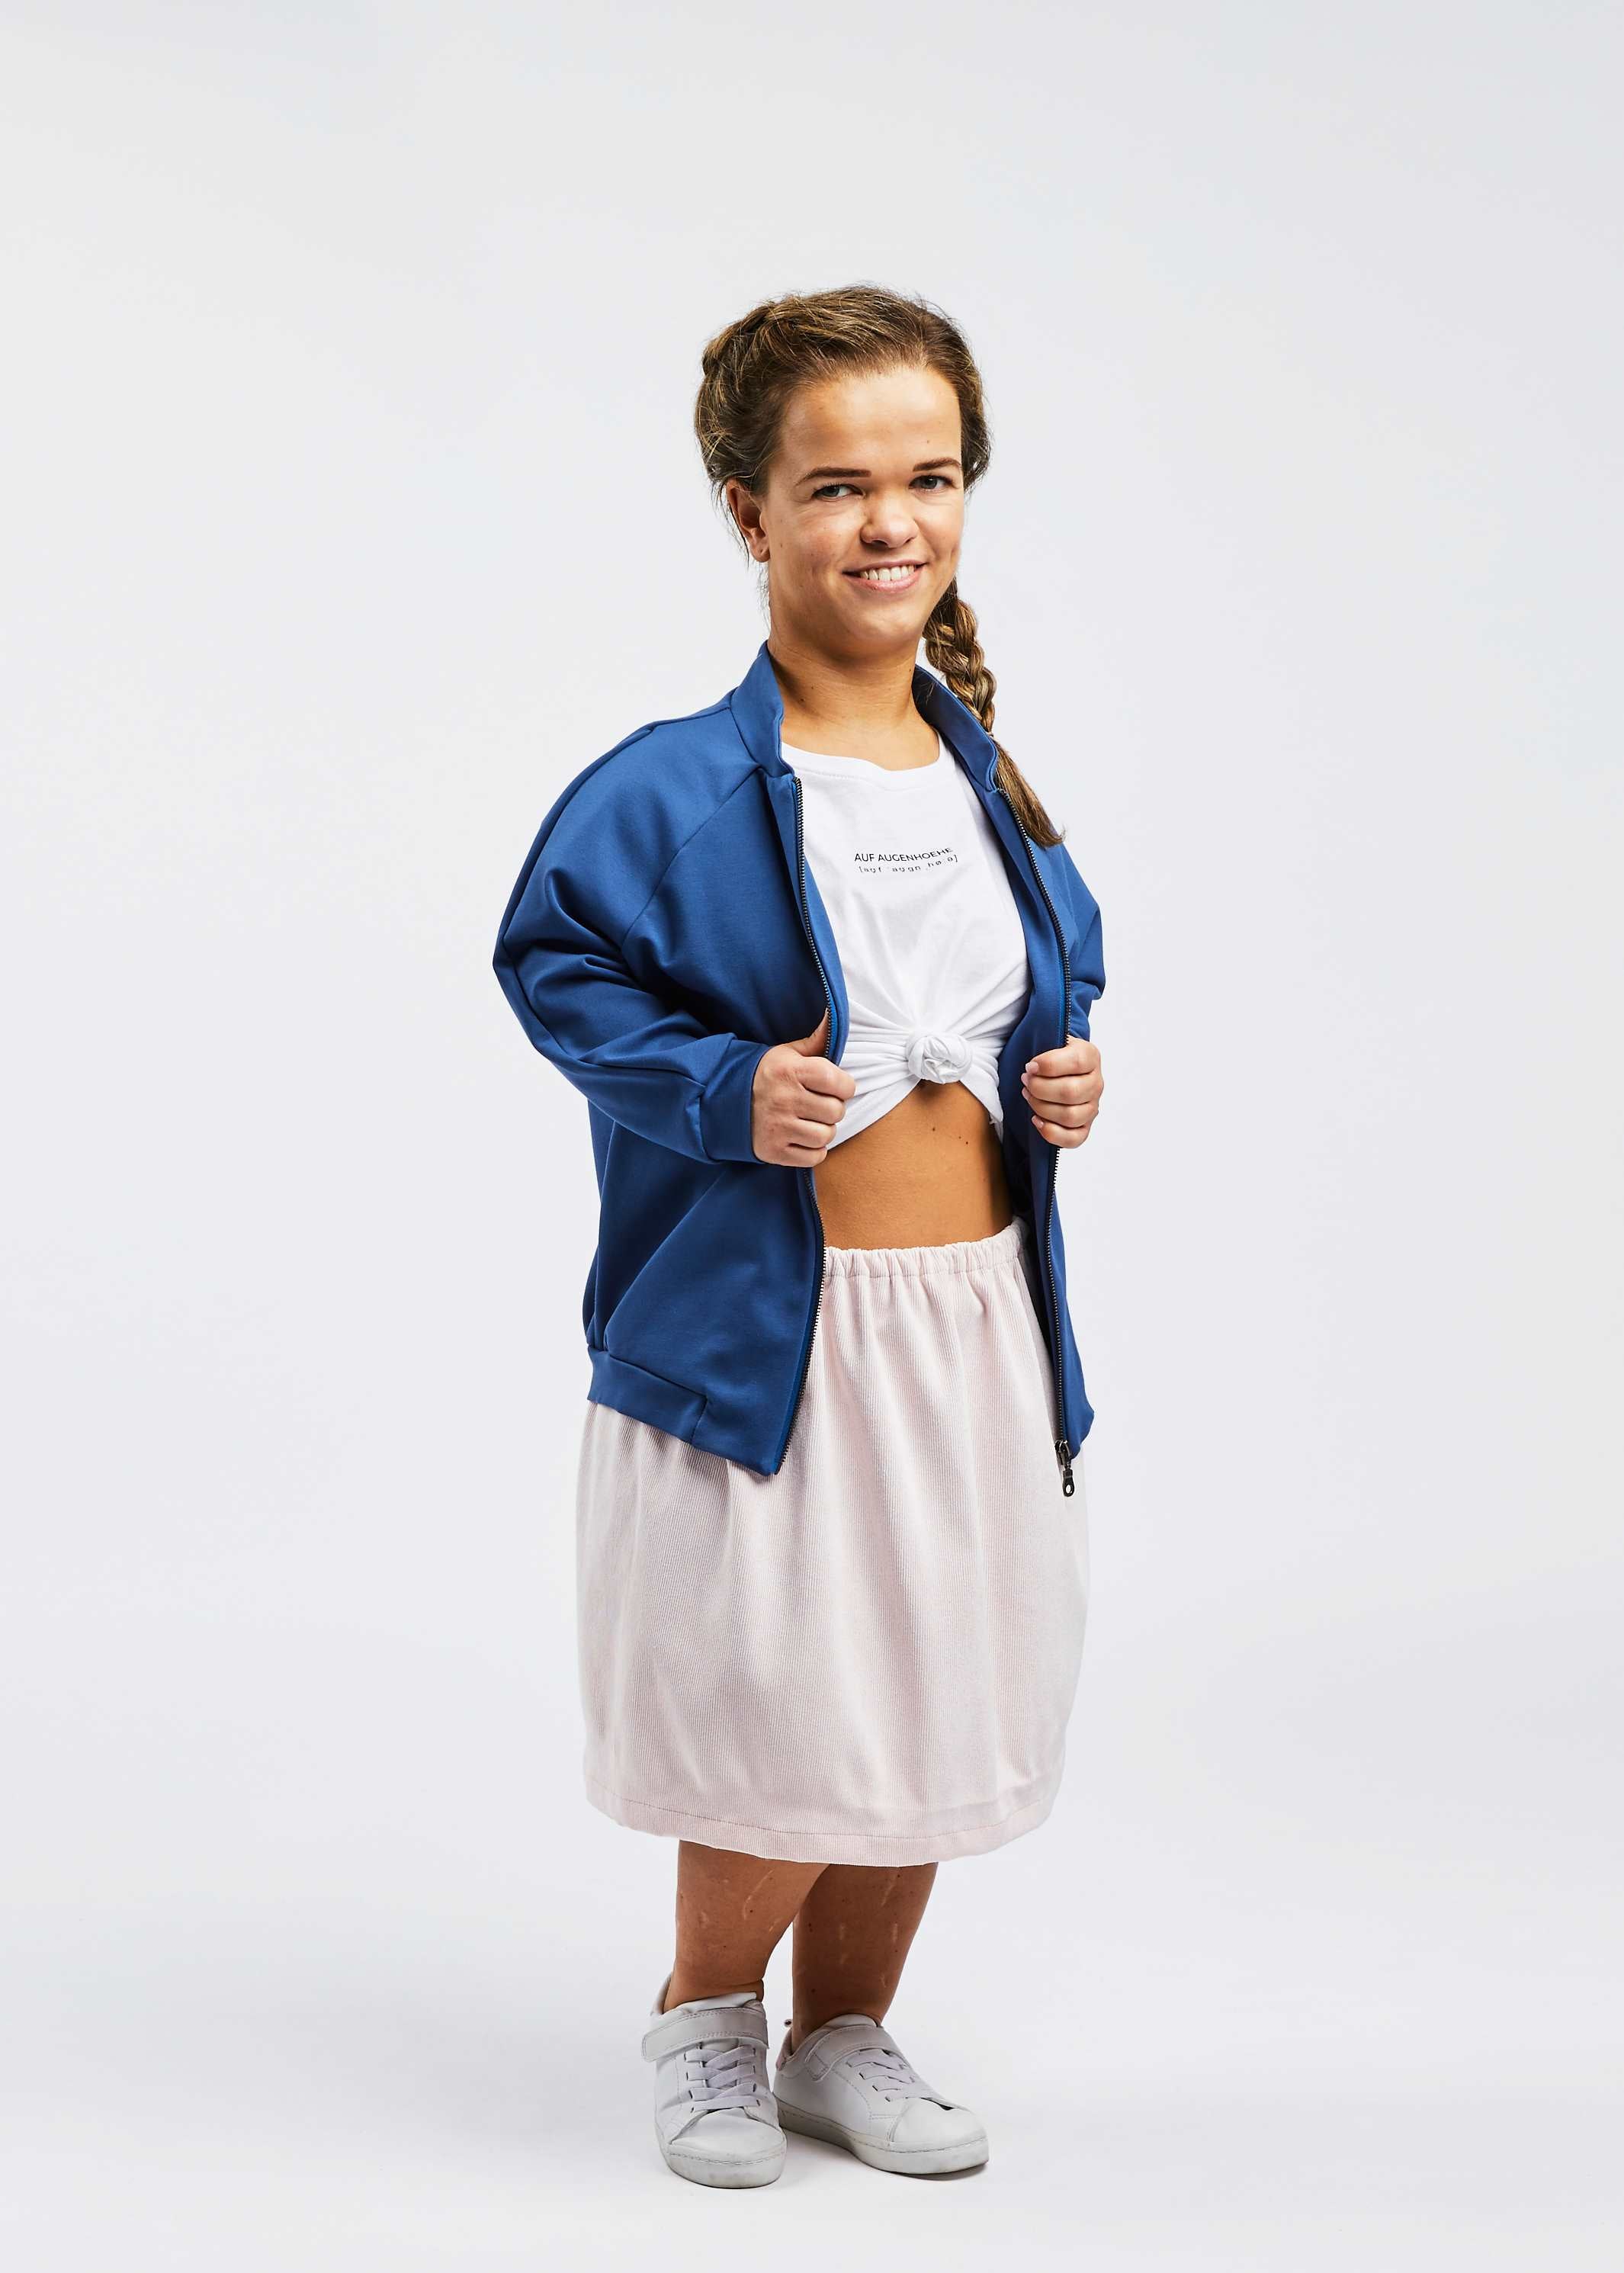 woman with dwarfism wearing blue college jacket and romantic outfit